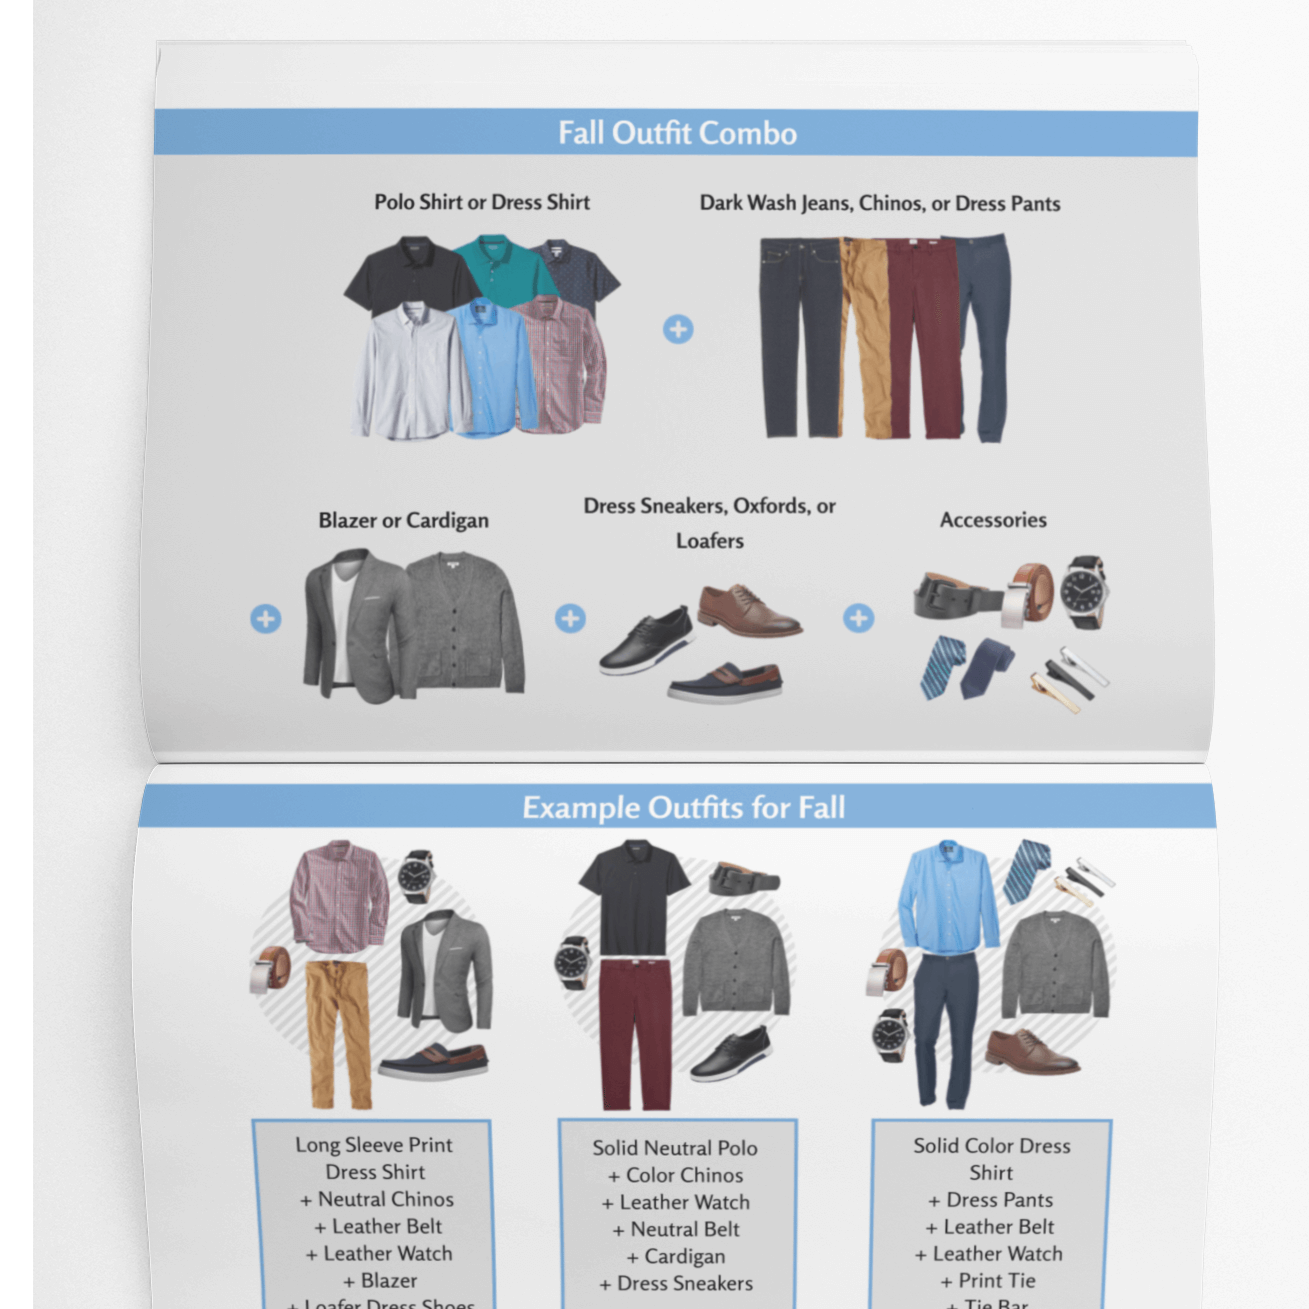 Denim Fit Guide  Mens fashion, Mens style guide, Mens outfits